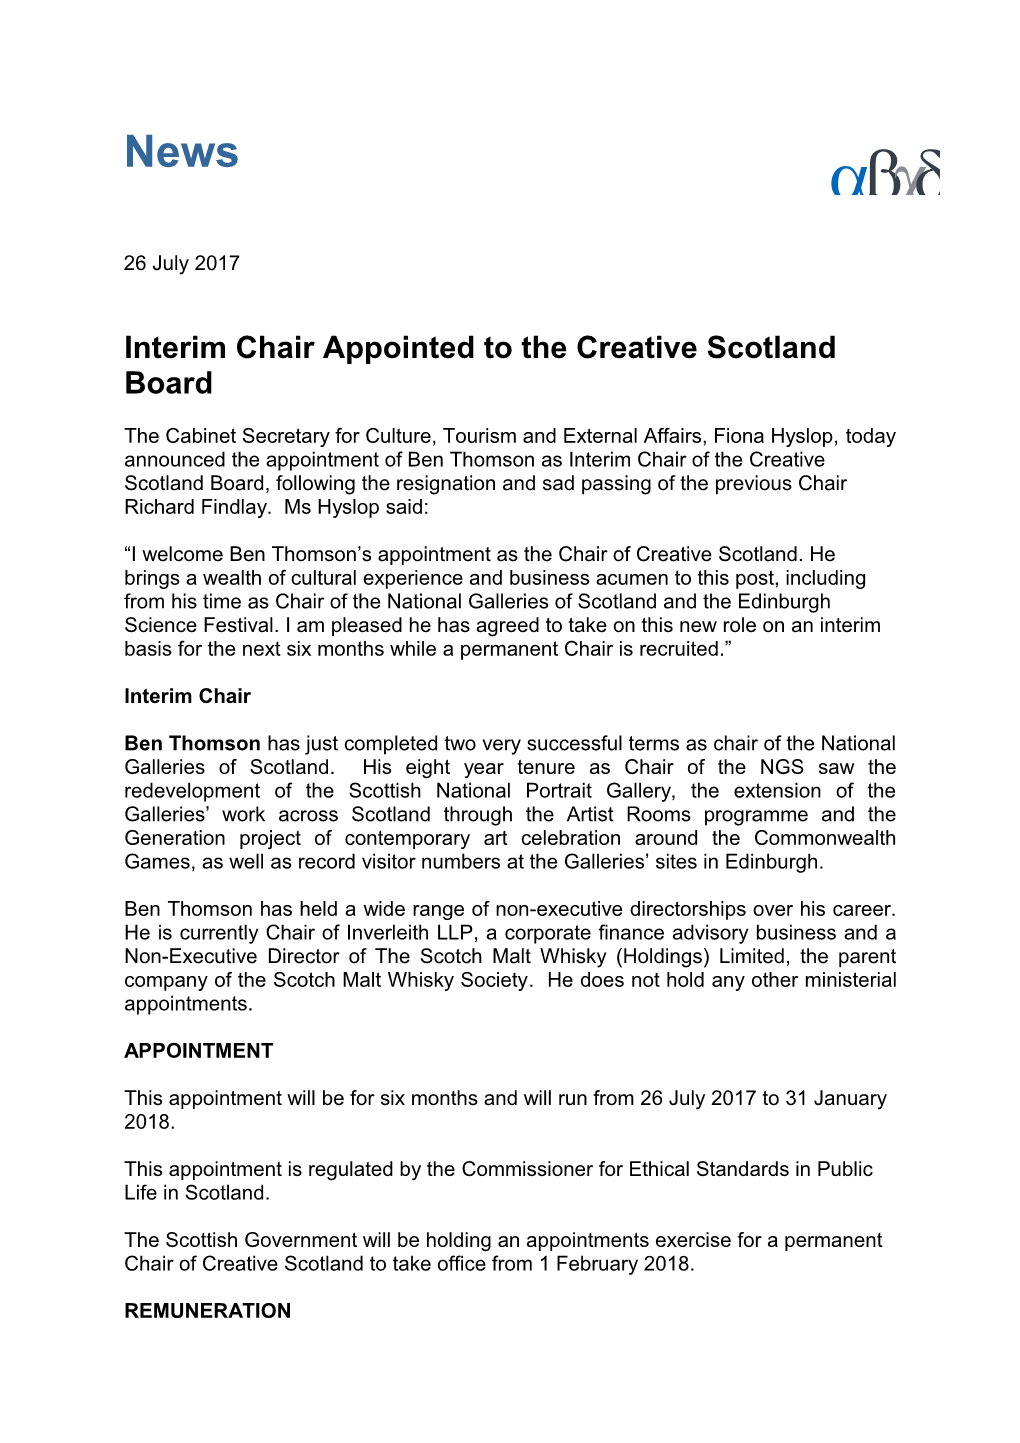 Interim Chair Appointed to the Creative Scotland Board